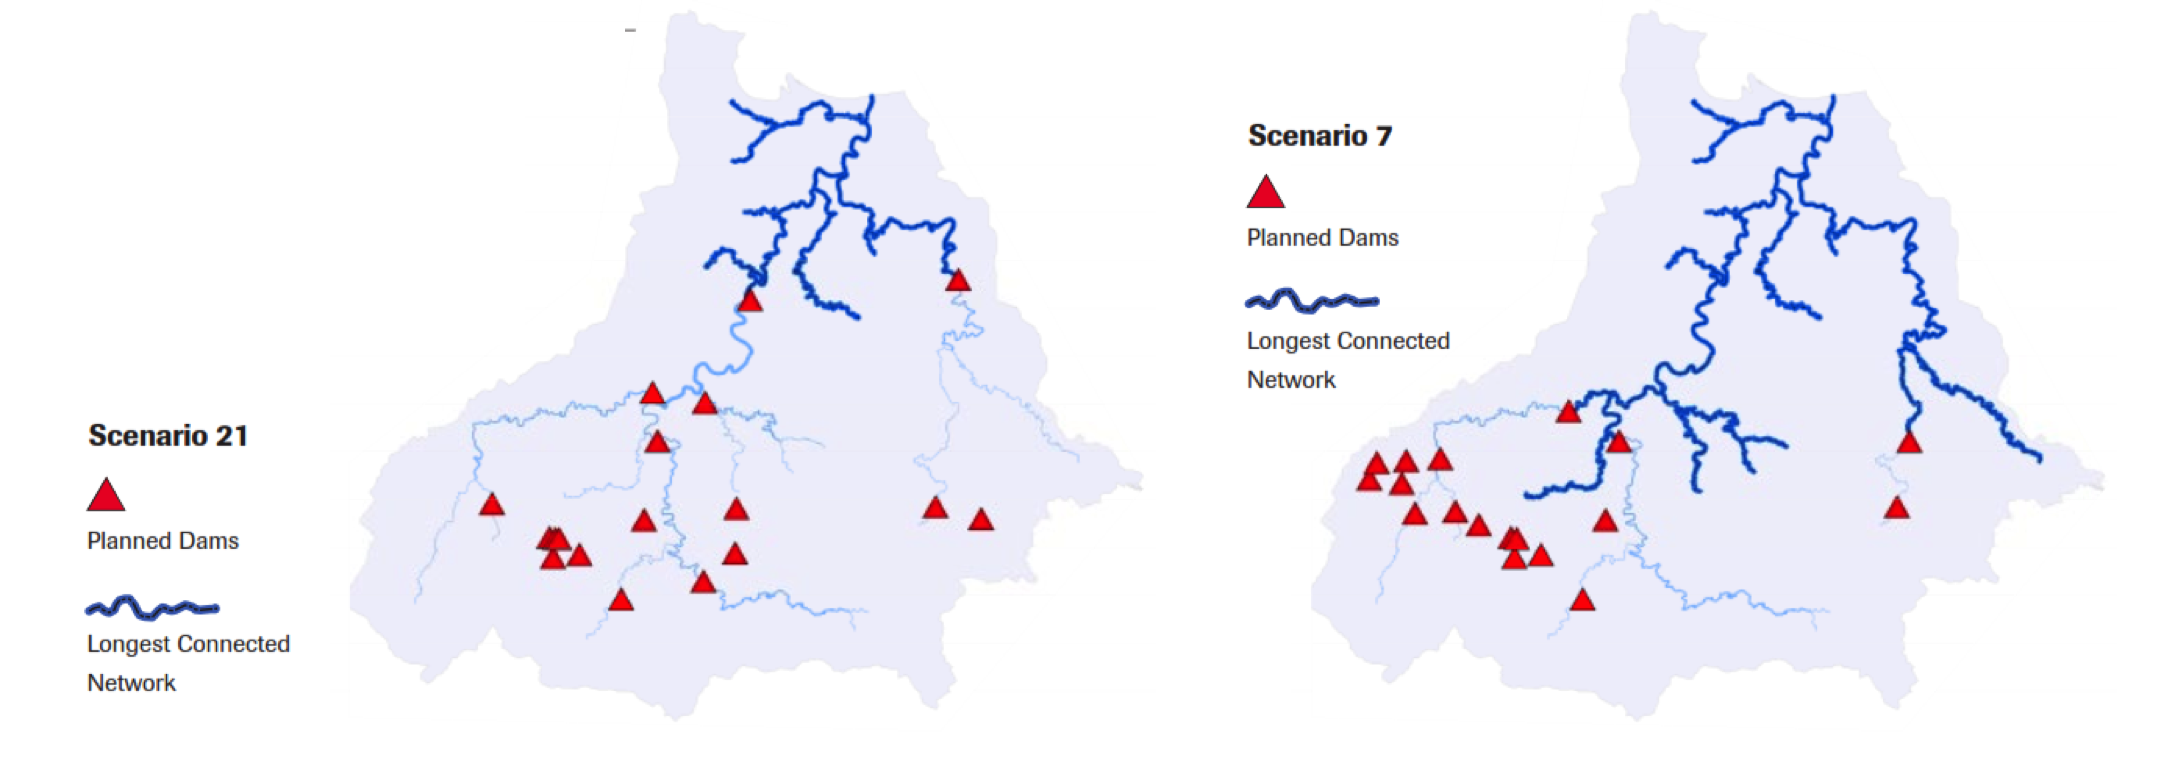 Figure 1. Two scenarios with similar hydropower development for the Coatzacoalcos River basin in Mexico (approximately 70% of basin capacity), but considerably different levels of connectivity: Scenario 7 (far right) has 452 km affected by fragmentation compared to Scenario 21 (left) with 970 km. Analysis conducted in collaboration with Mexico’s Federal Commission for Electricity (CFE) and the National Commission for Knowledge and Use of Biodiversity (CONABIO).